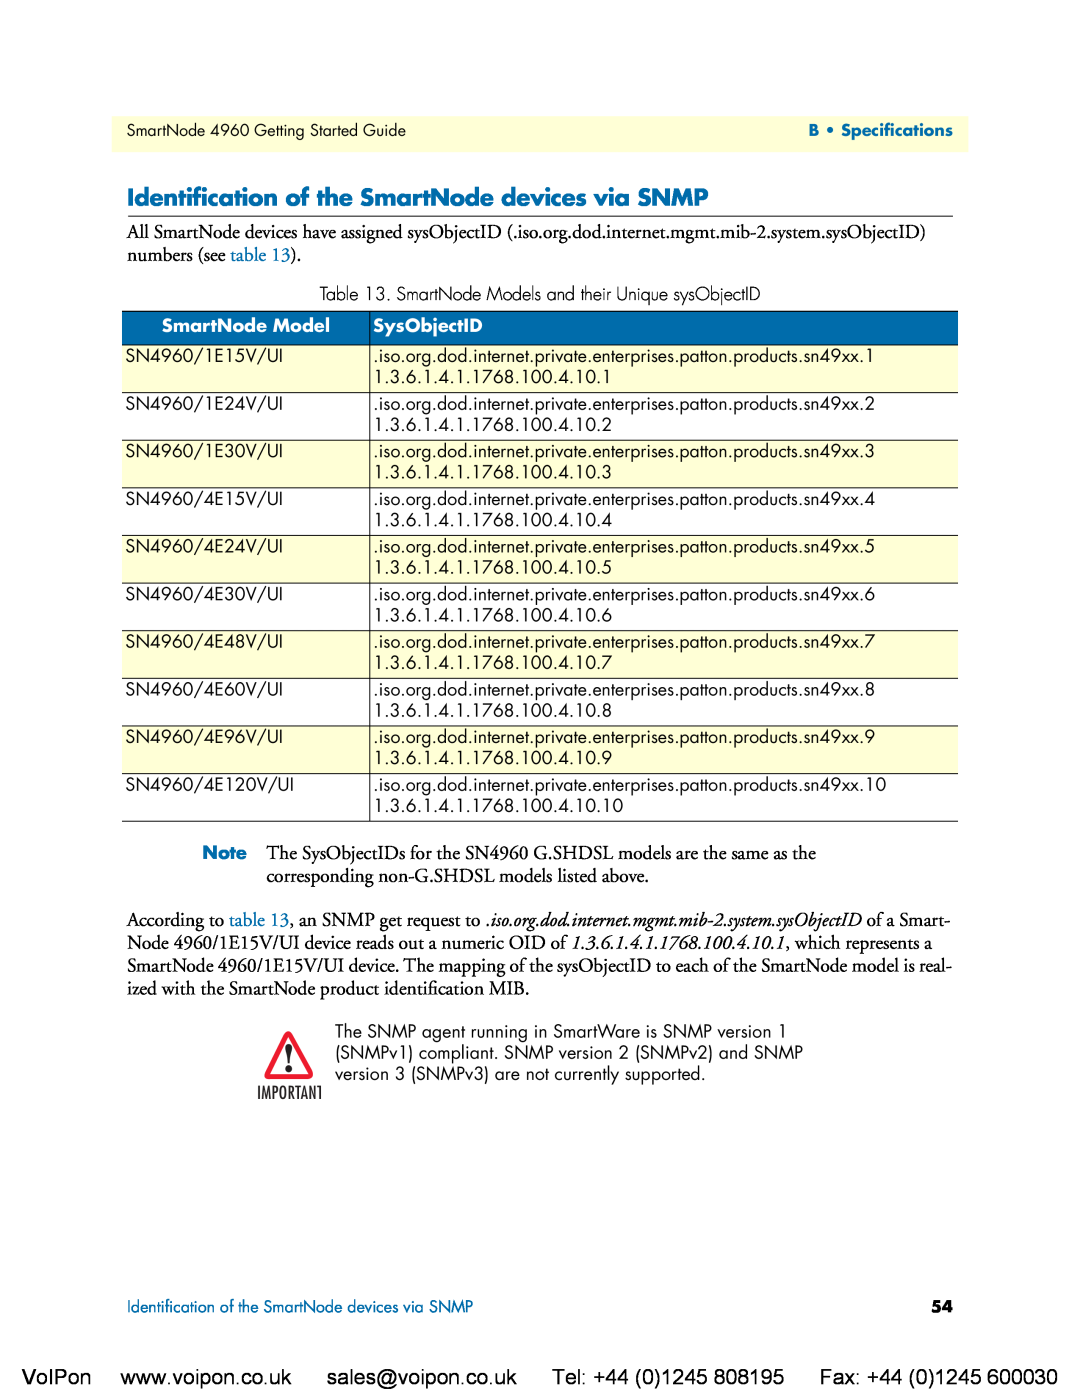 Patton electronic 4960 manual Identiﬁcation of the SmartNode devices via SNMP, SmartNode Model, SysObjectID 